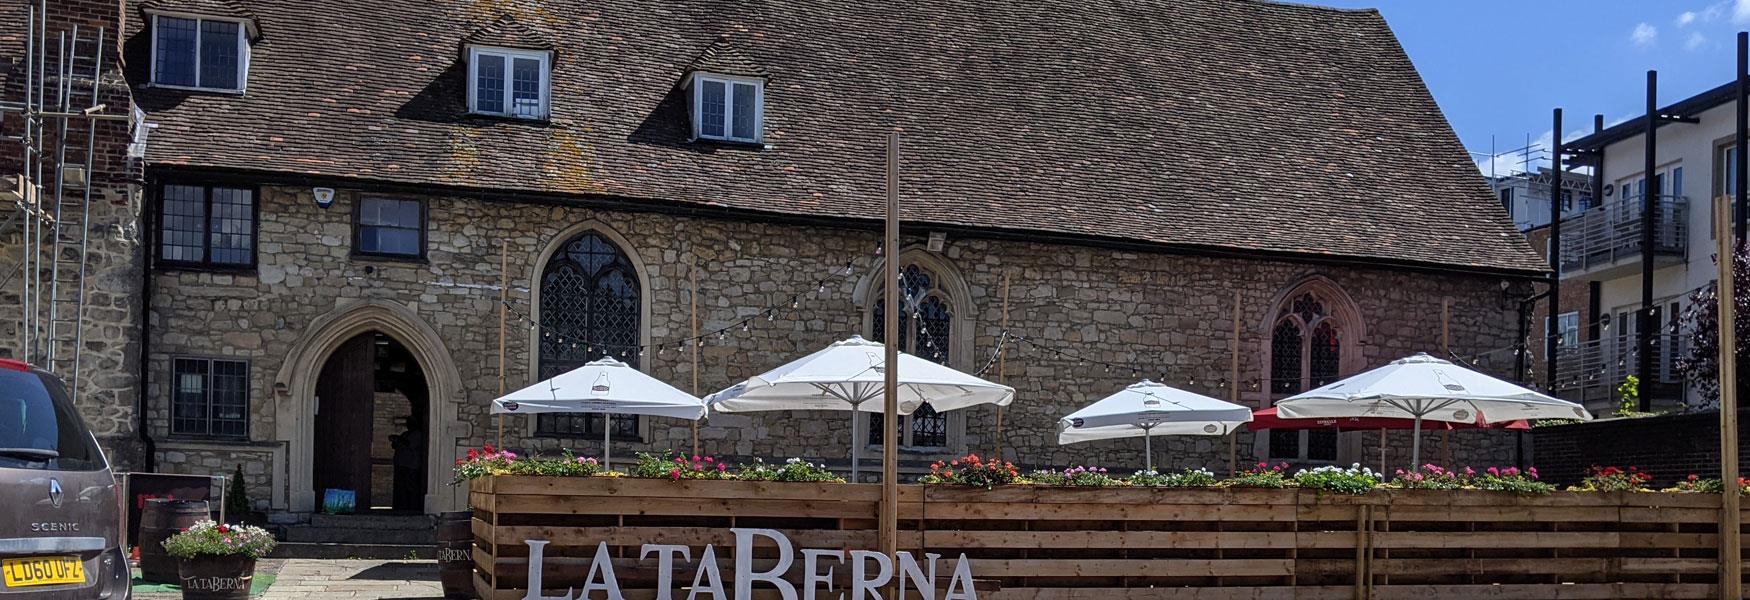 Corpus Christ Hall is now home to La Taberna Spanish restaurant but has an interesting history, of friendship, community and caring.  It was also a grammar school and has been a cooperage for Fremlins Brewery which was over the road.